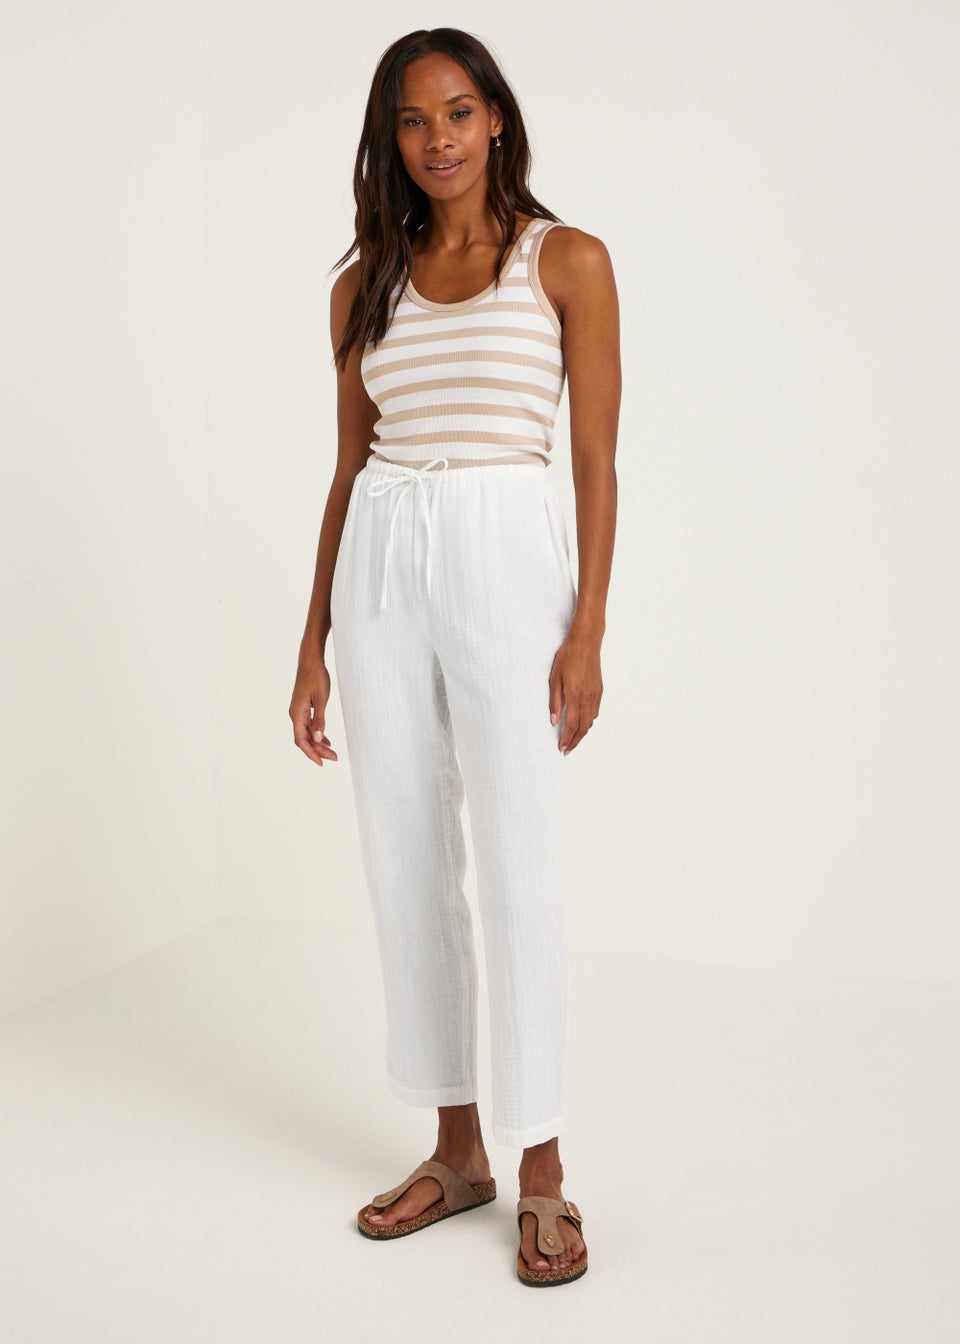 NEW ex Matalan Navy White Contrast Stitched Linen Belted Cropped Trousers  10-18 | eBay